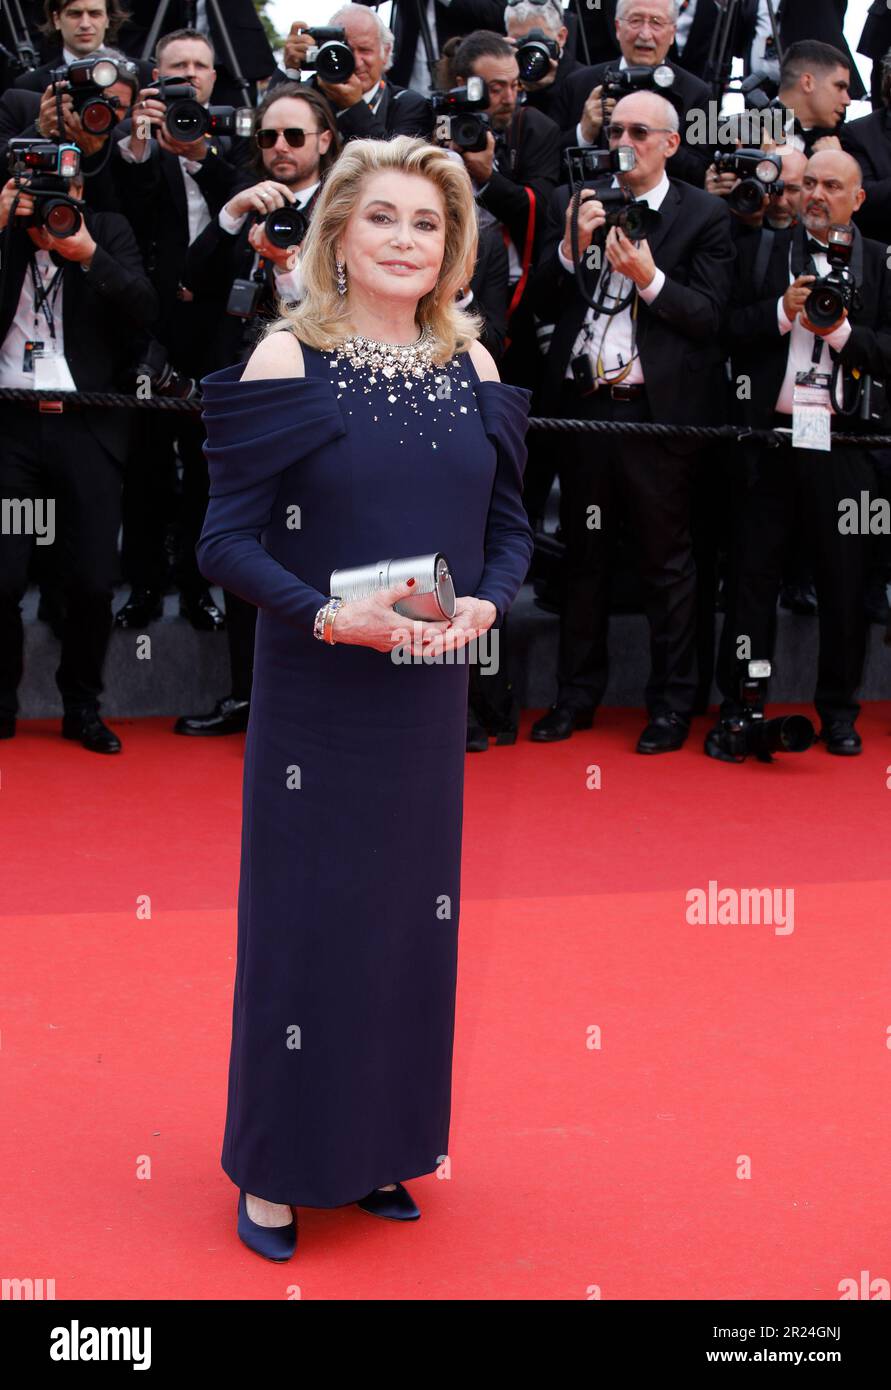 Catherine Deneuve attends the 'Jeanne du Barry' premiere and opening ceremony during the 76th annual Cannes Film Festival on May 16, 2023 in Cannes, France. Credit: DGP/imageSPACE/MediaPunch Stock Photo